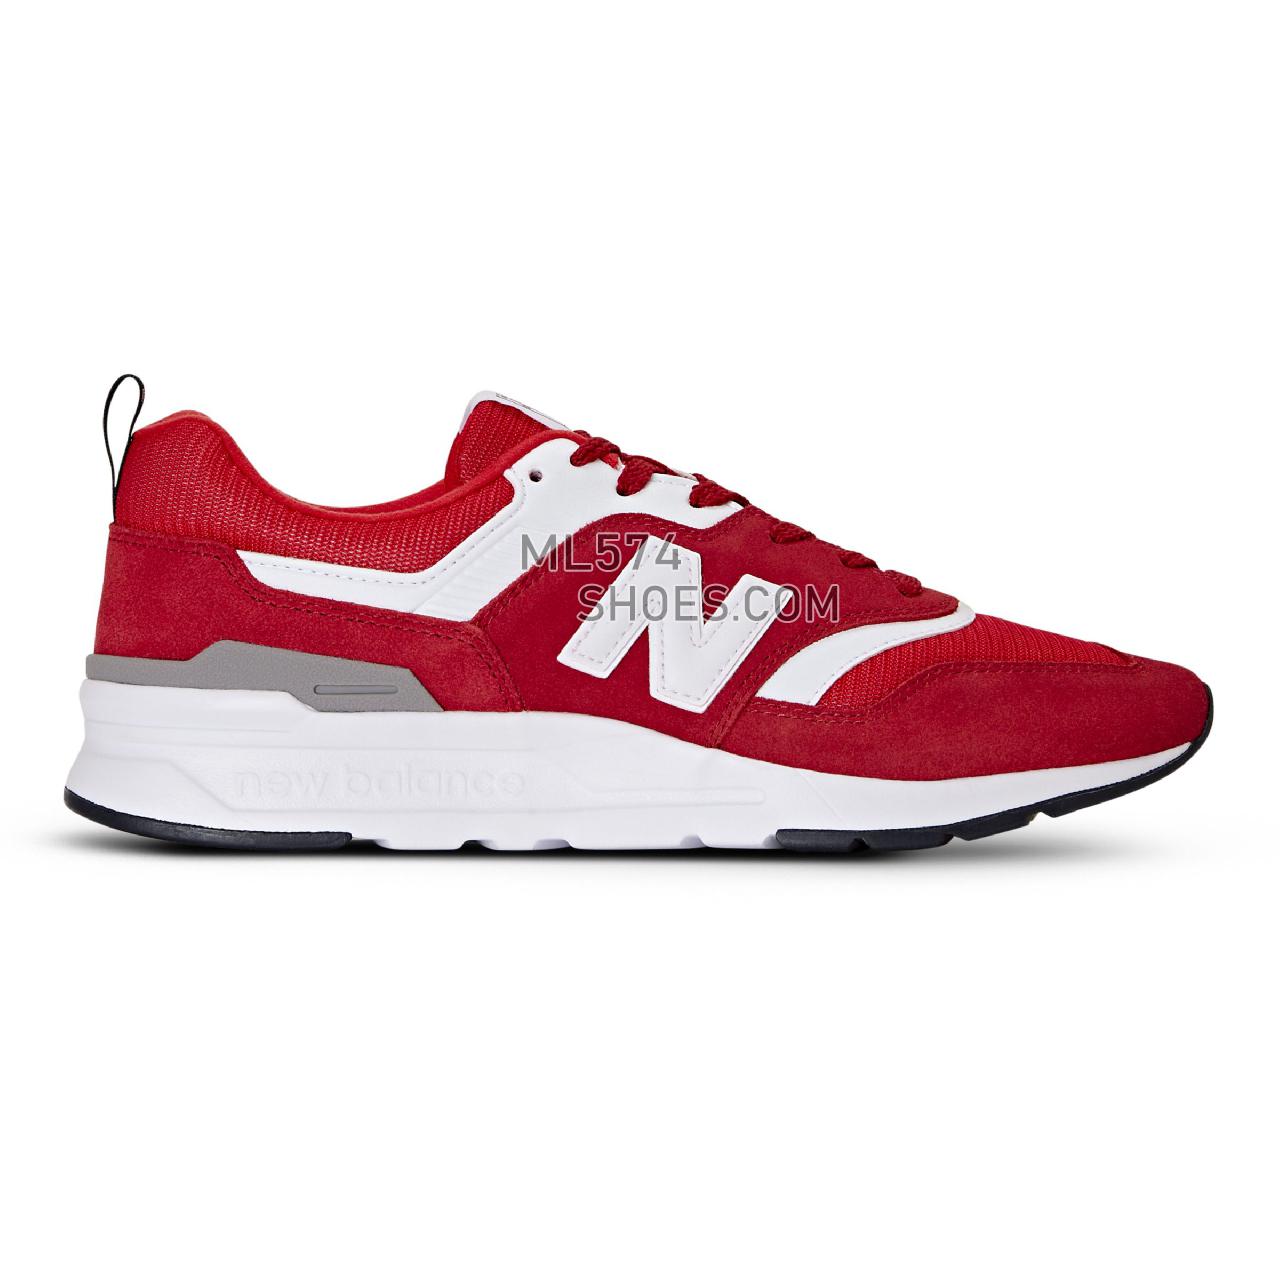 New Balance Athletic Club 997H - Men's Sport Style Sneakers - Chilli Pepper with Racing Red - CM997HB1